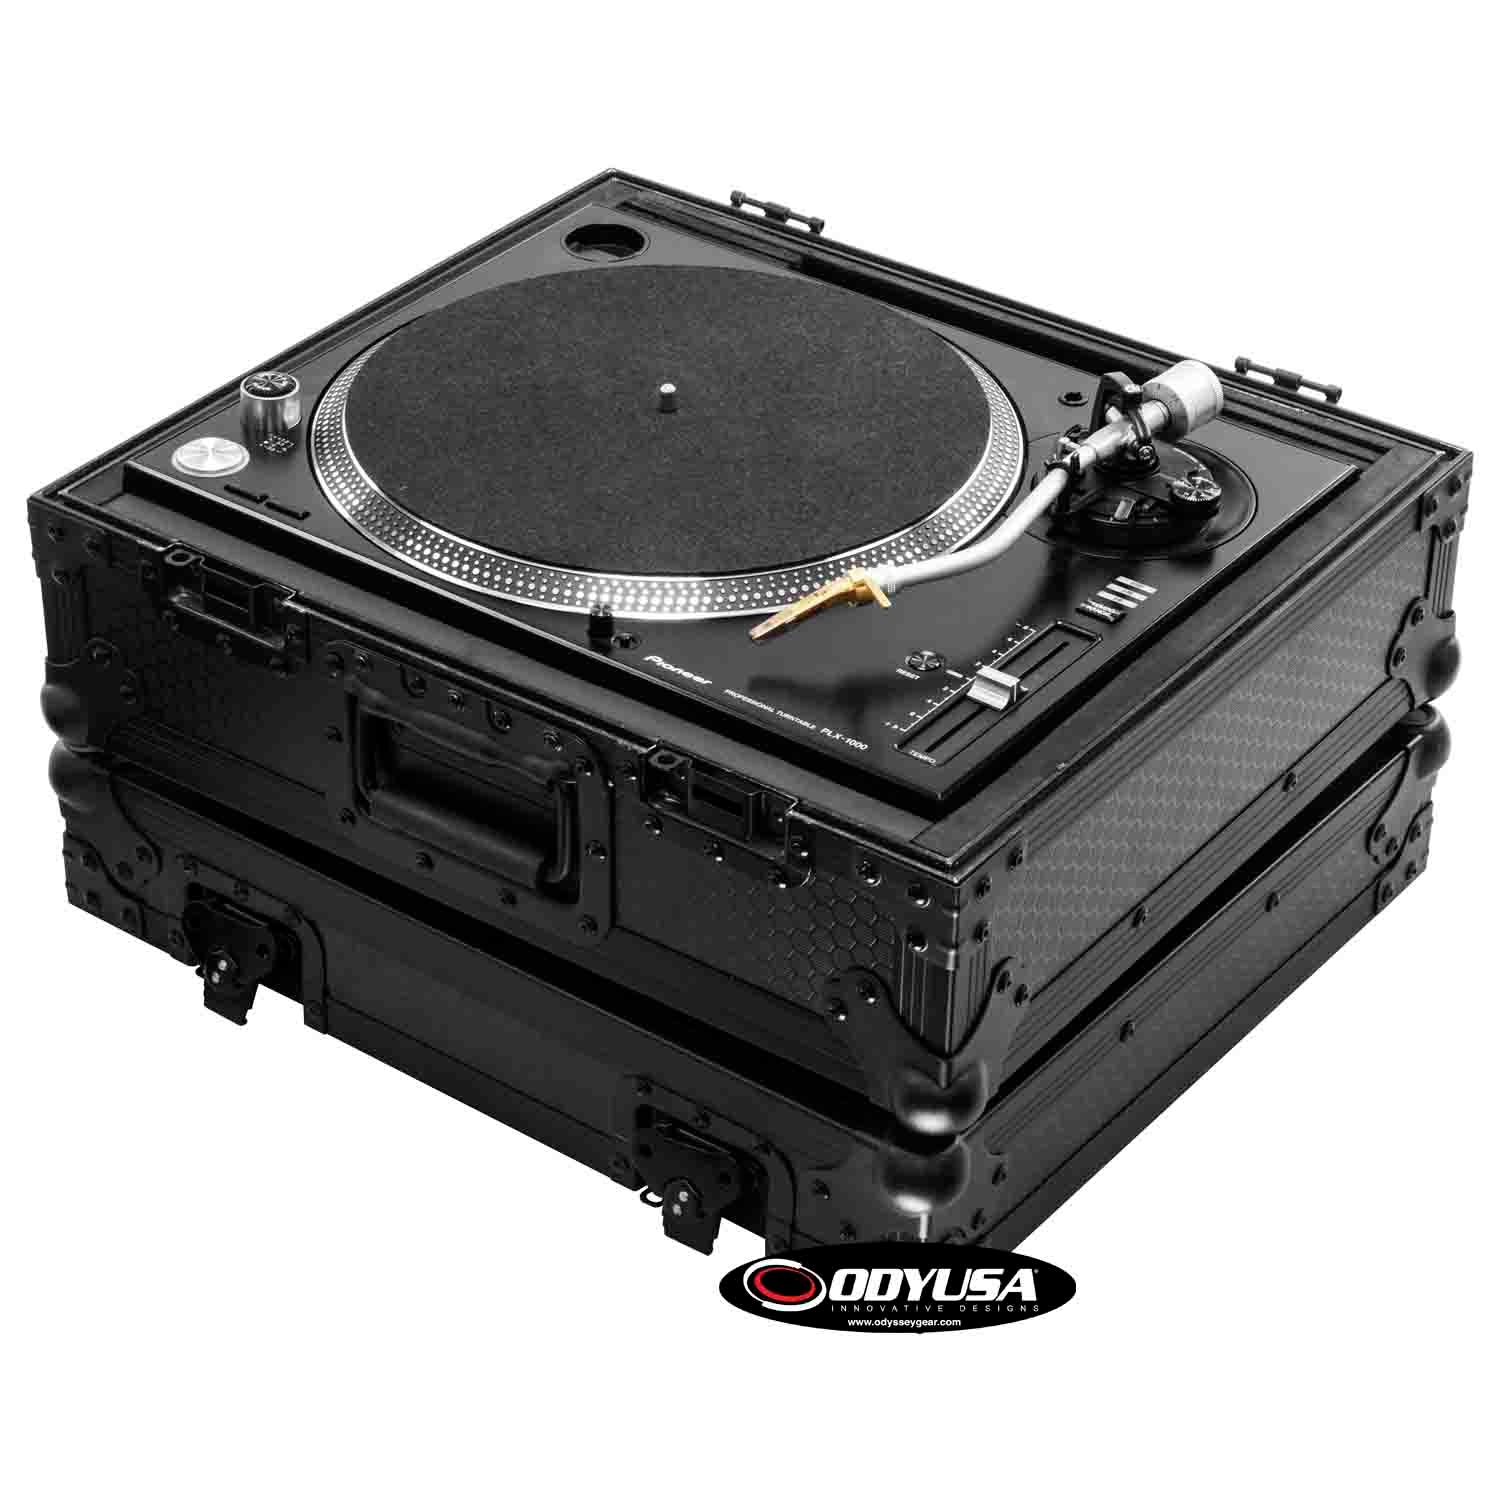 Odyssey 810103 DJ Case for Technics 1200 Pioneer Turntables or Similar Size Turntables Odyssey